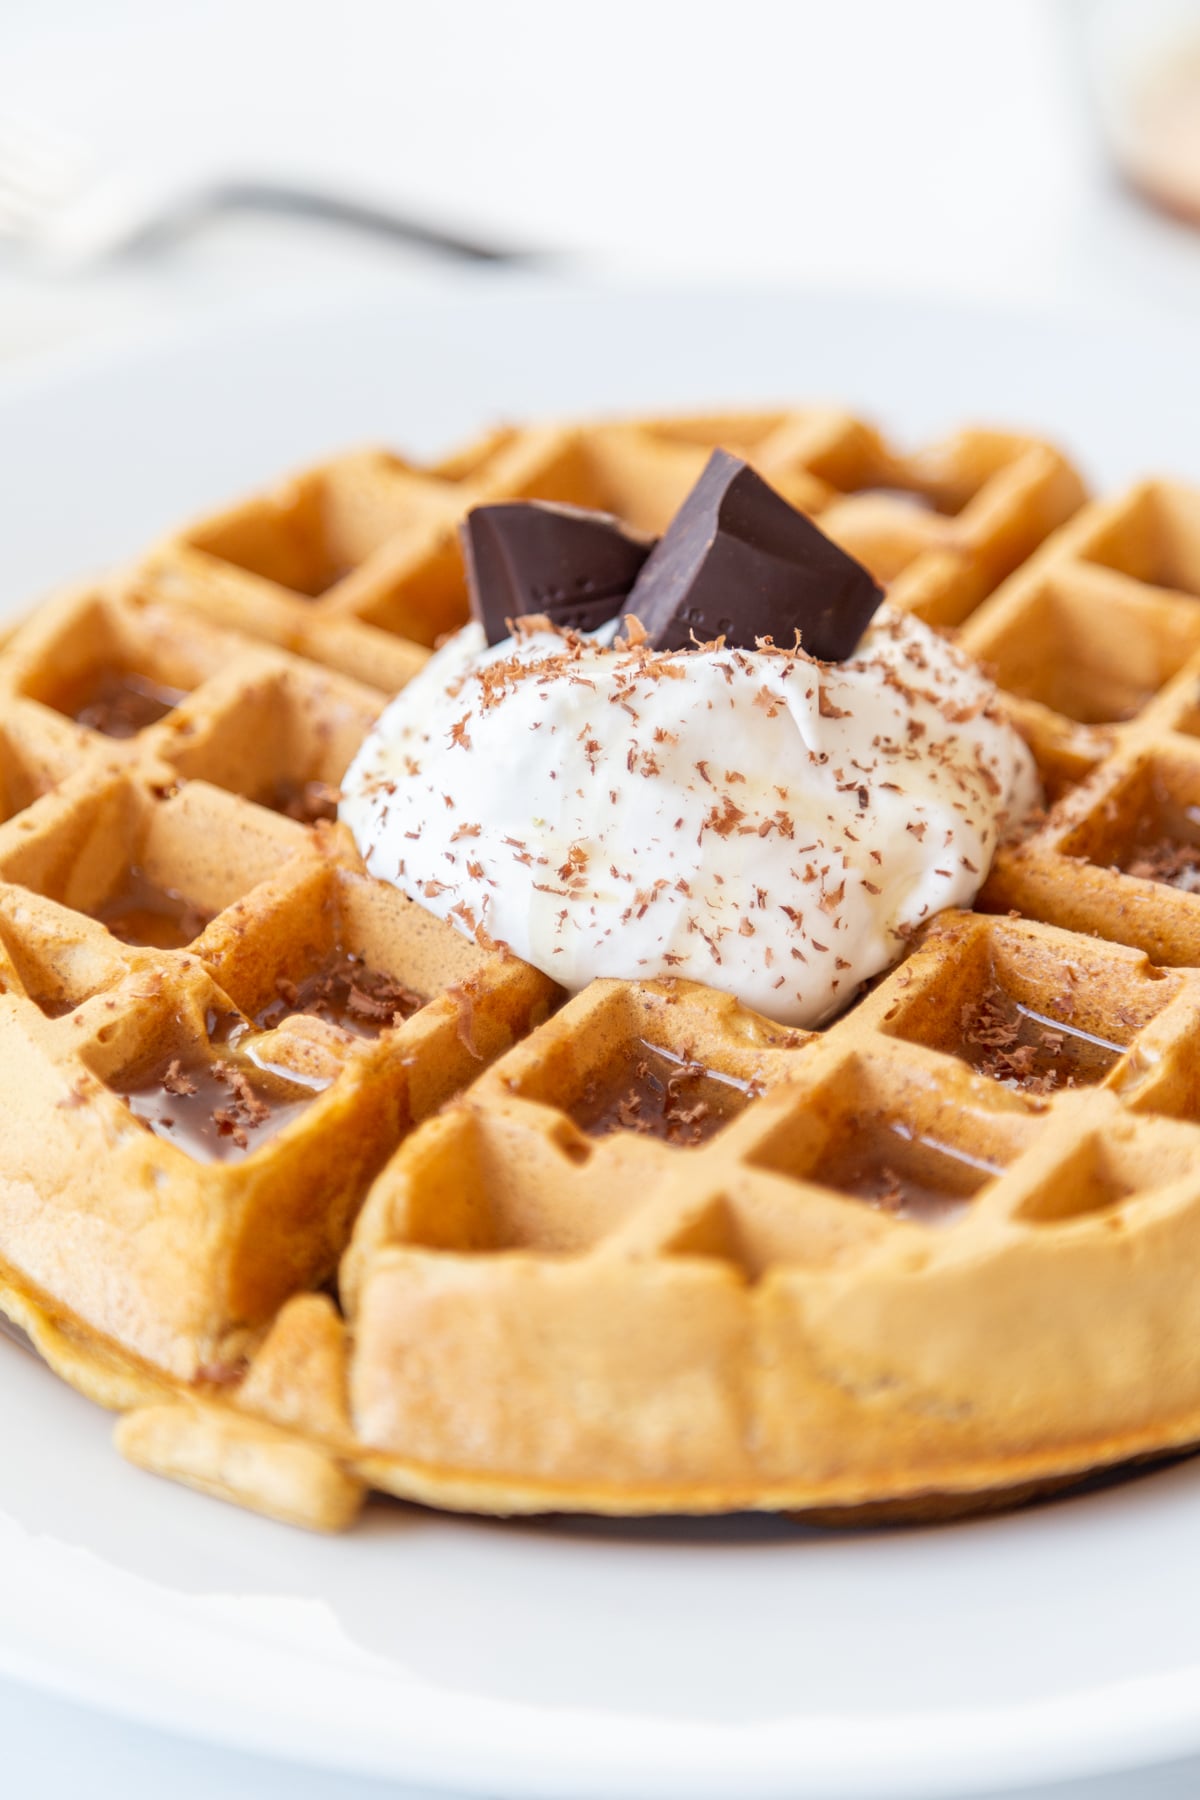 A Belgian waffle with whipped topping, chocolate shavings, and chocolate pieces sticking out of the whipped cream on a white plate. 